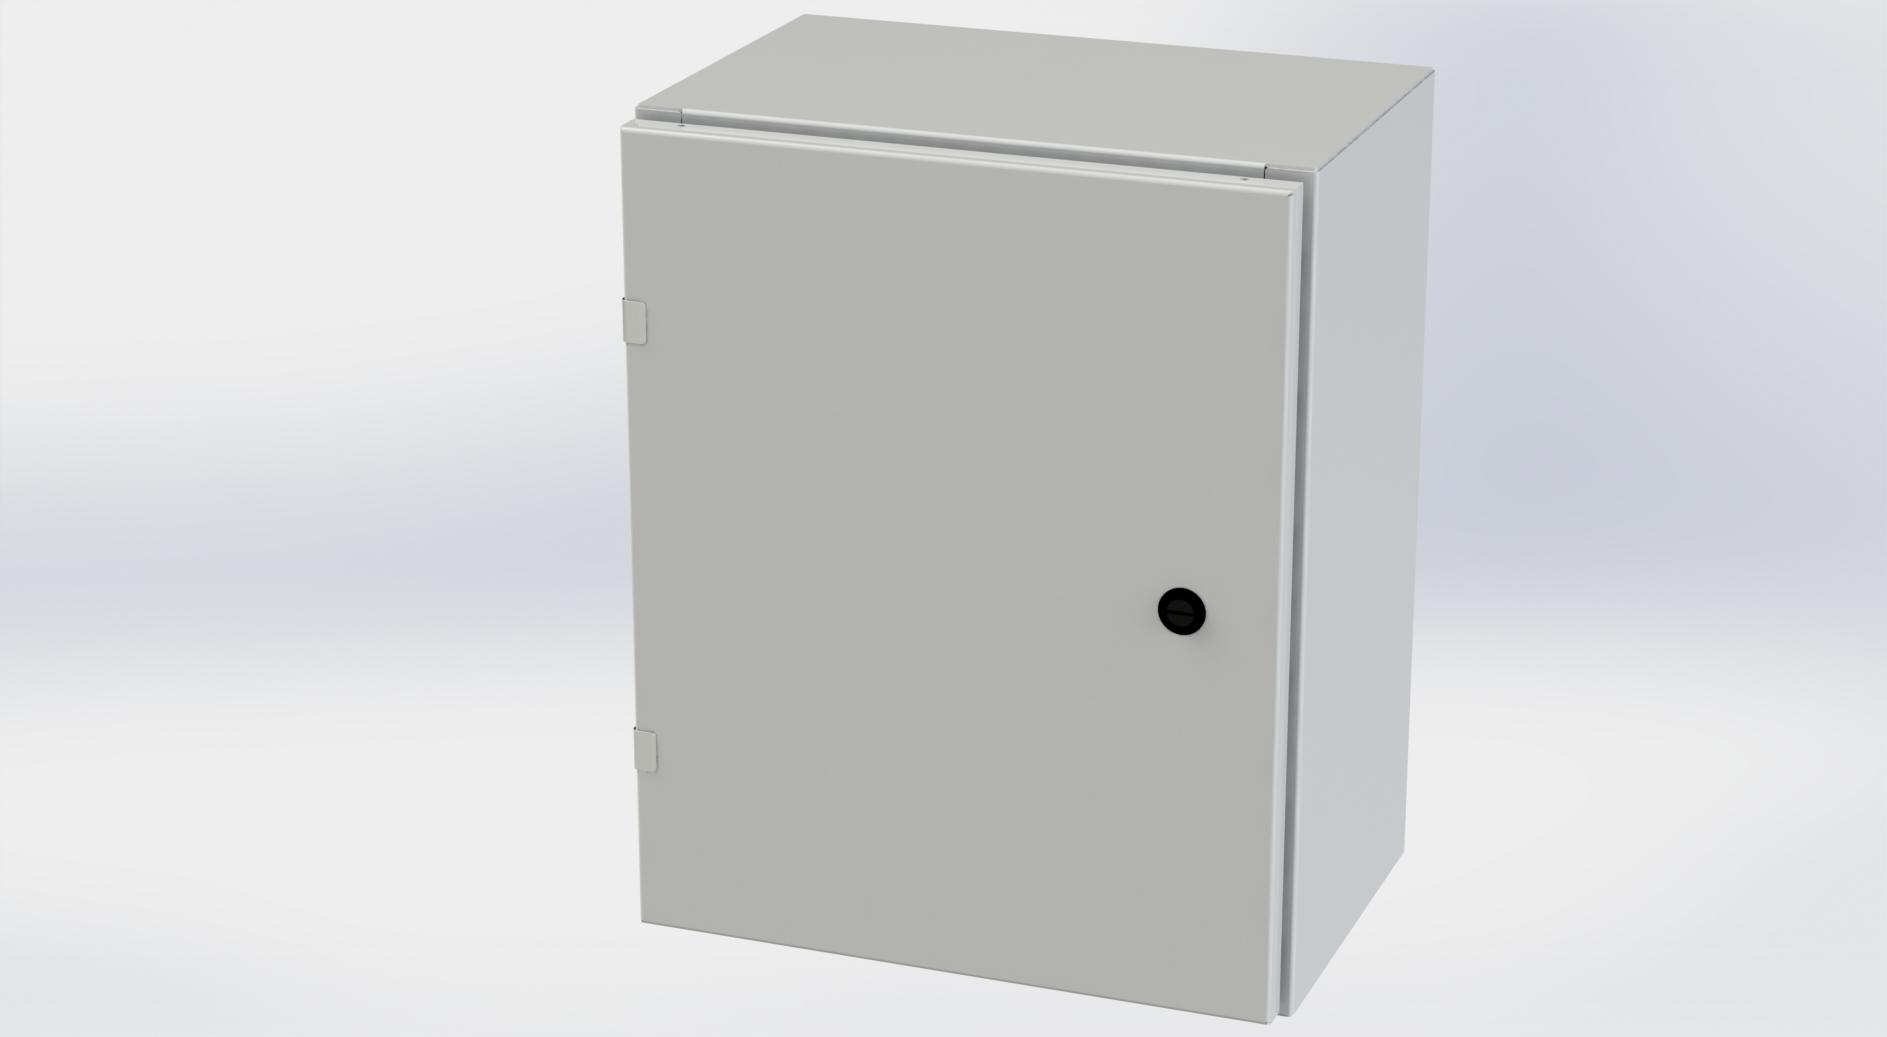 Saginaw Control SCE-20EL1610LPLG EL Enclosure, Height:20.00", Width:16.00", Depth:10.00", RAL 7035 gray powder coating inside and out. Optional sub-panels are powder coated white.